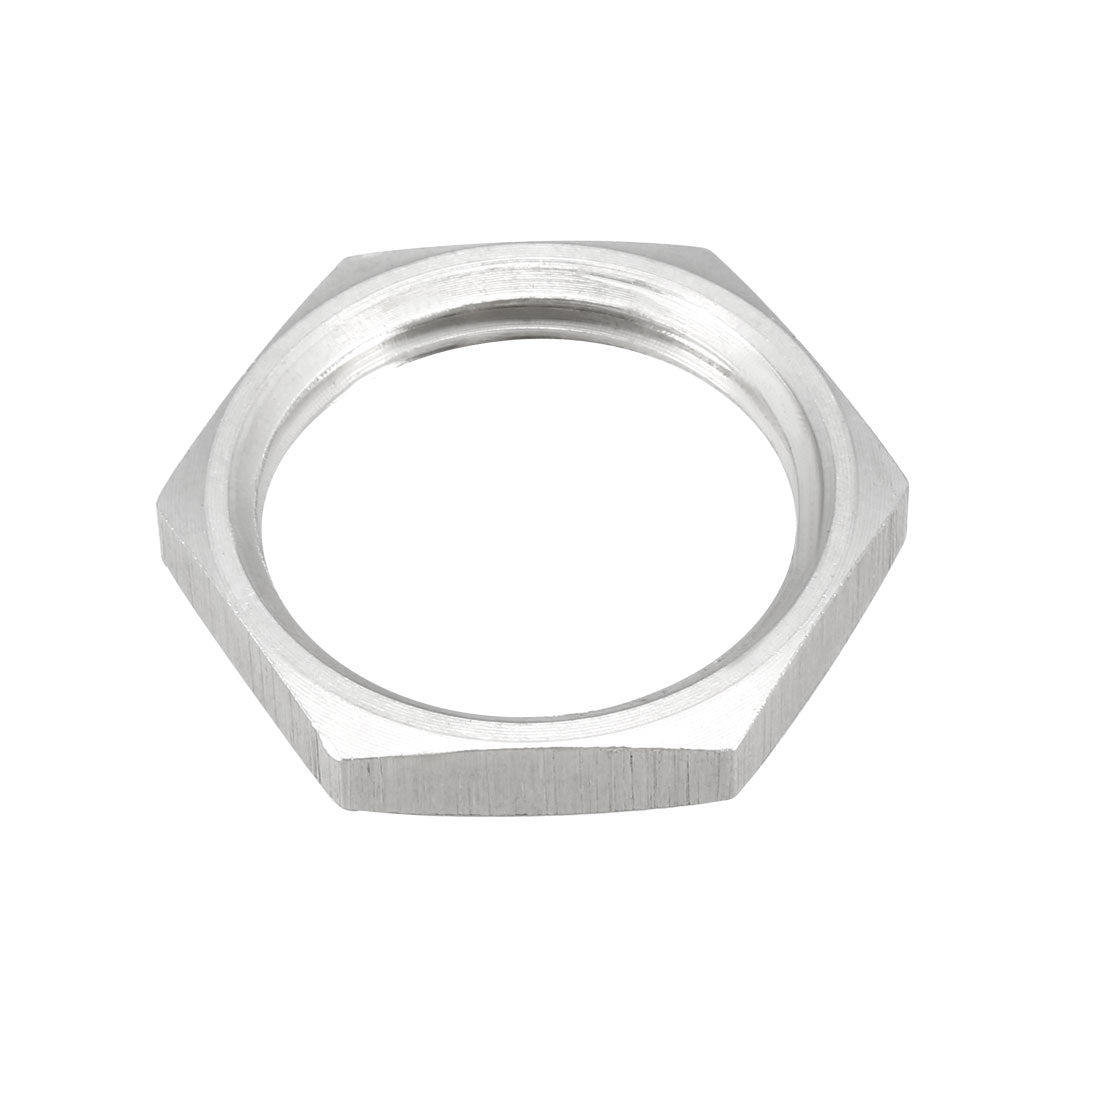 uxcell Uxcell Pipe Fitting Hex Locknut SUS304 Stainless Steel G1/2 Inch Female Threaded